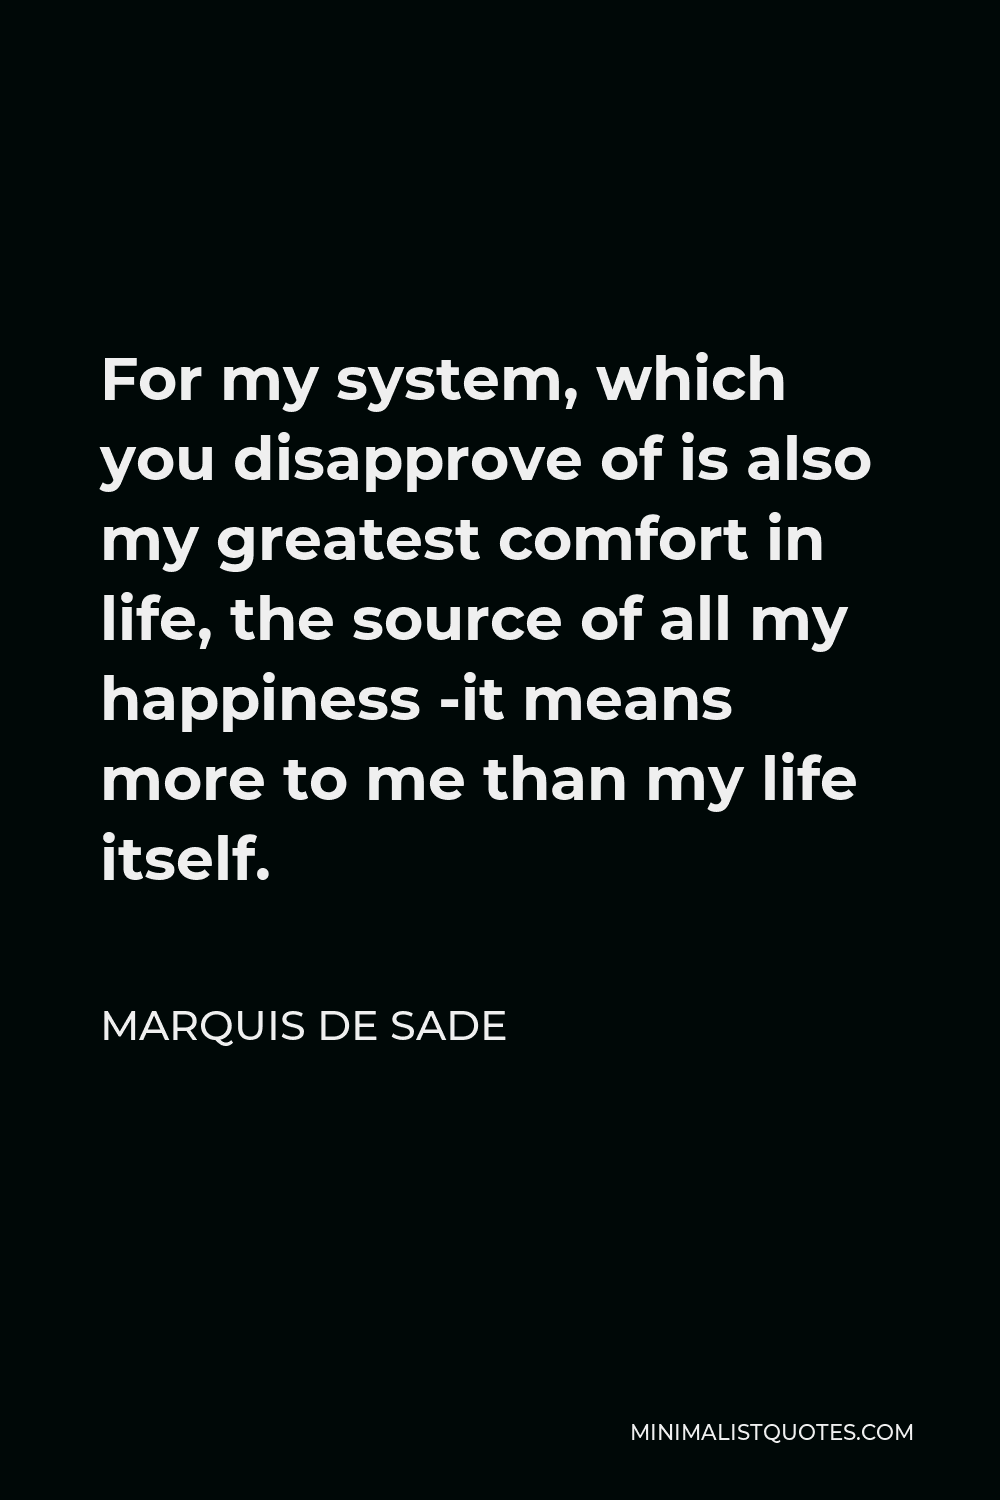 Marquis de Sade Quote - For my system, which you disapprove of is also my greatest comfort in life, the source of all my happiness -it means more to me than my life itself.